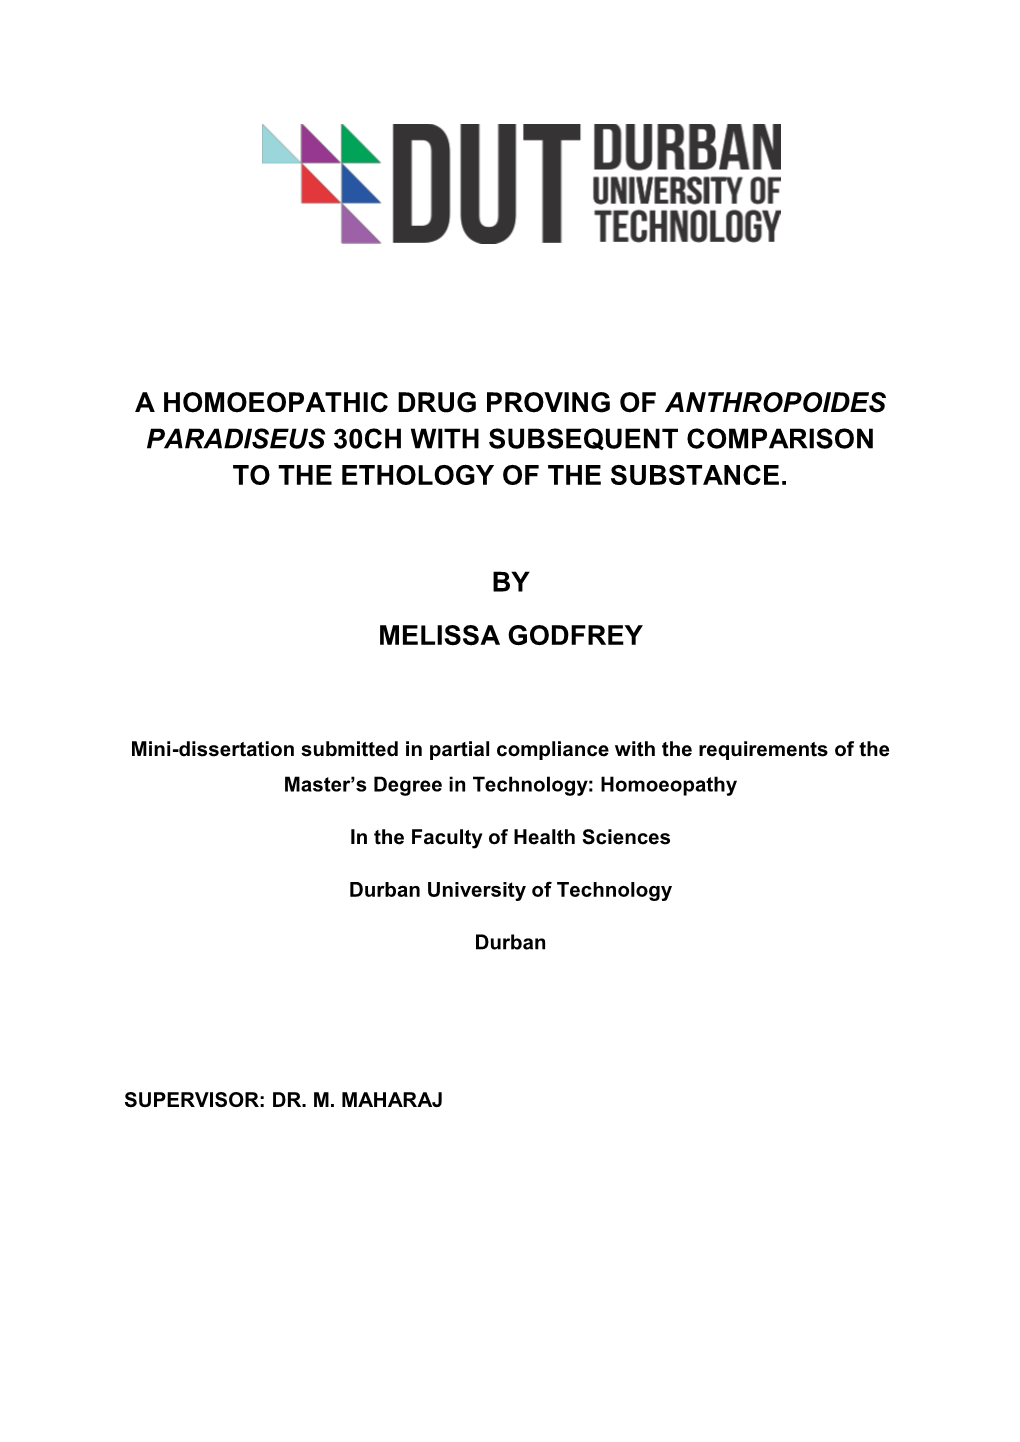 A Homoeopathic Drug Proving of Anthropoides Paradiseus 30Ch with Subsequent Comparison to the Ethology of the Substance